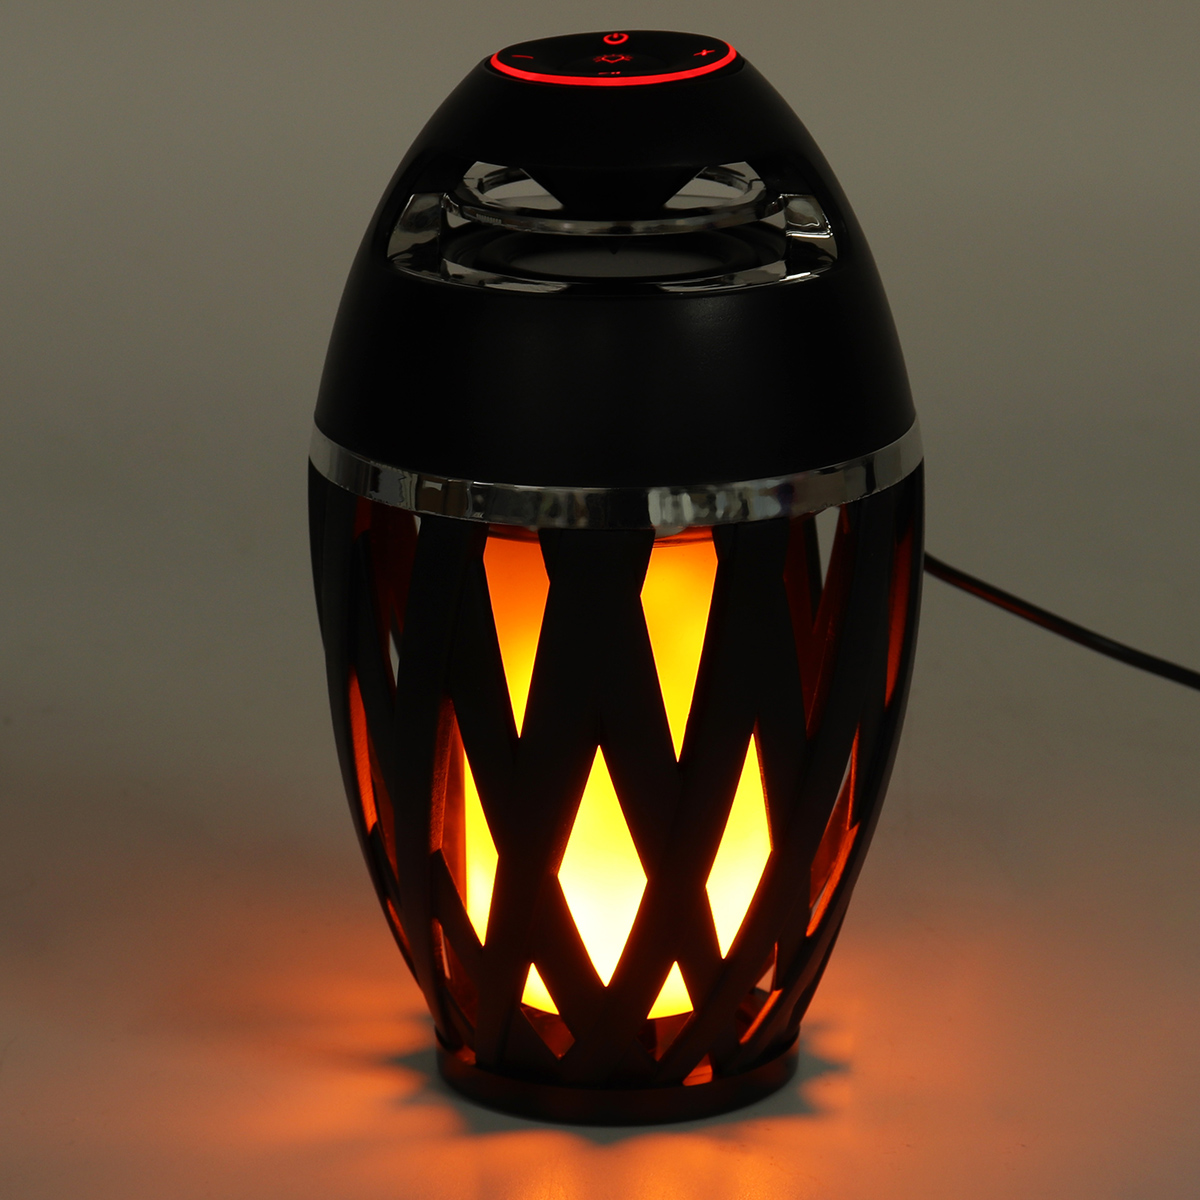 Outdoor-bluetooth-Speaker-LED-Flame-Light-Table-Lamp-Torch-Atmosphere-Bright-Night-Light-DC5V-1730264-9